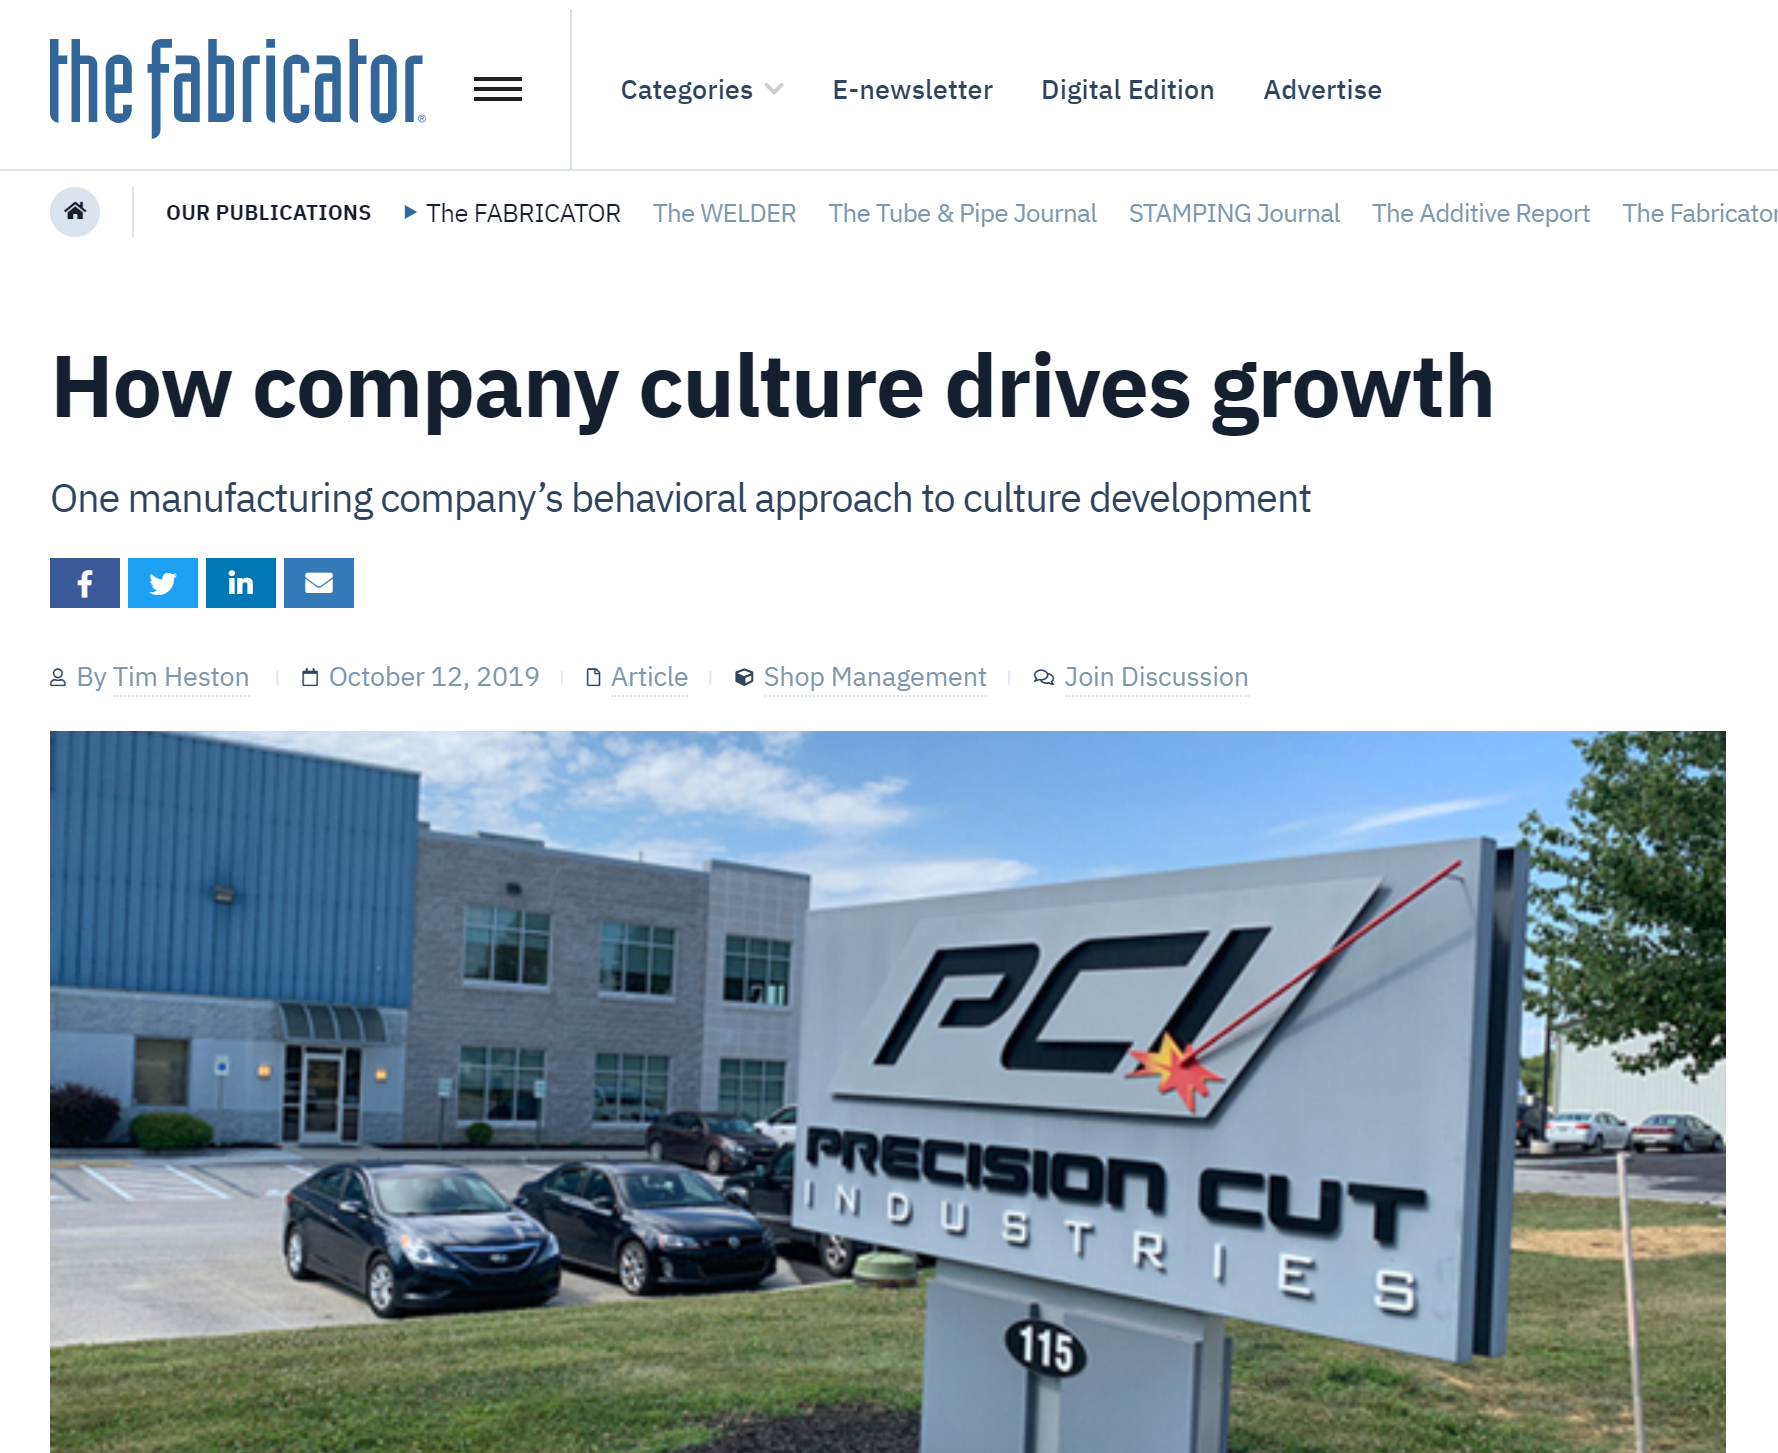 Article about Precision Cut Industries growth